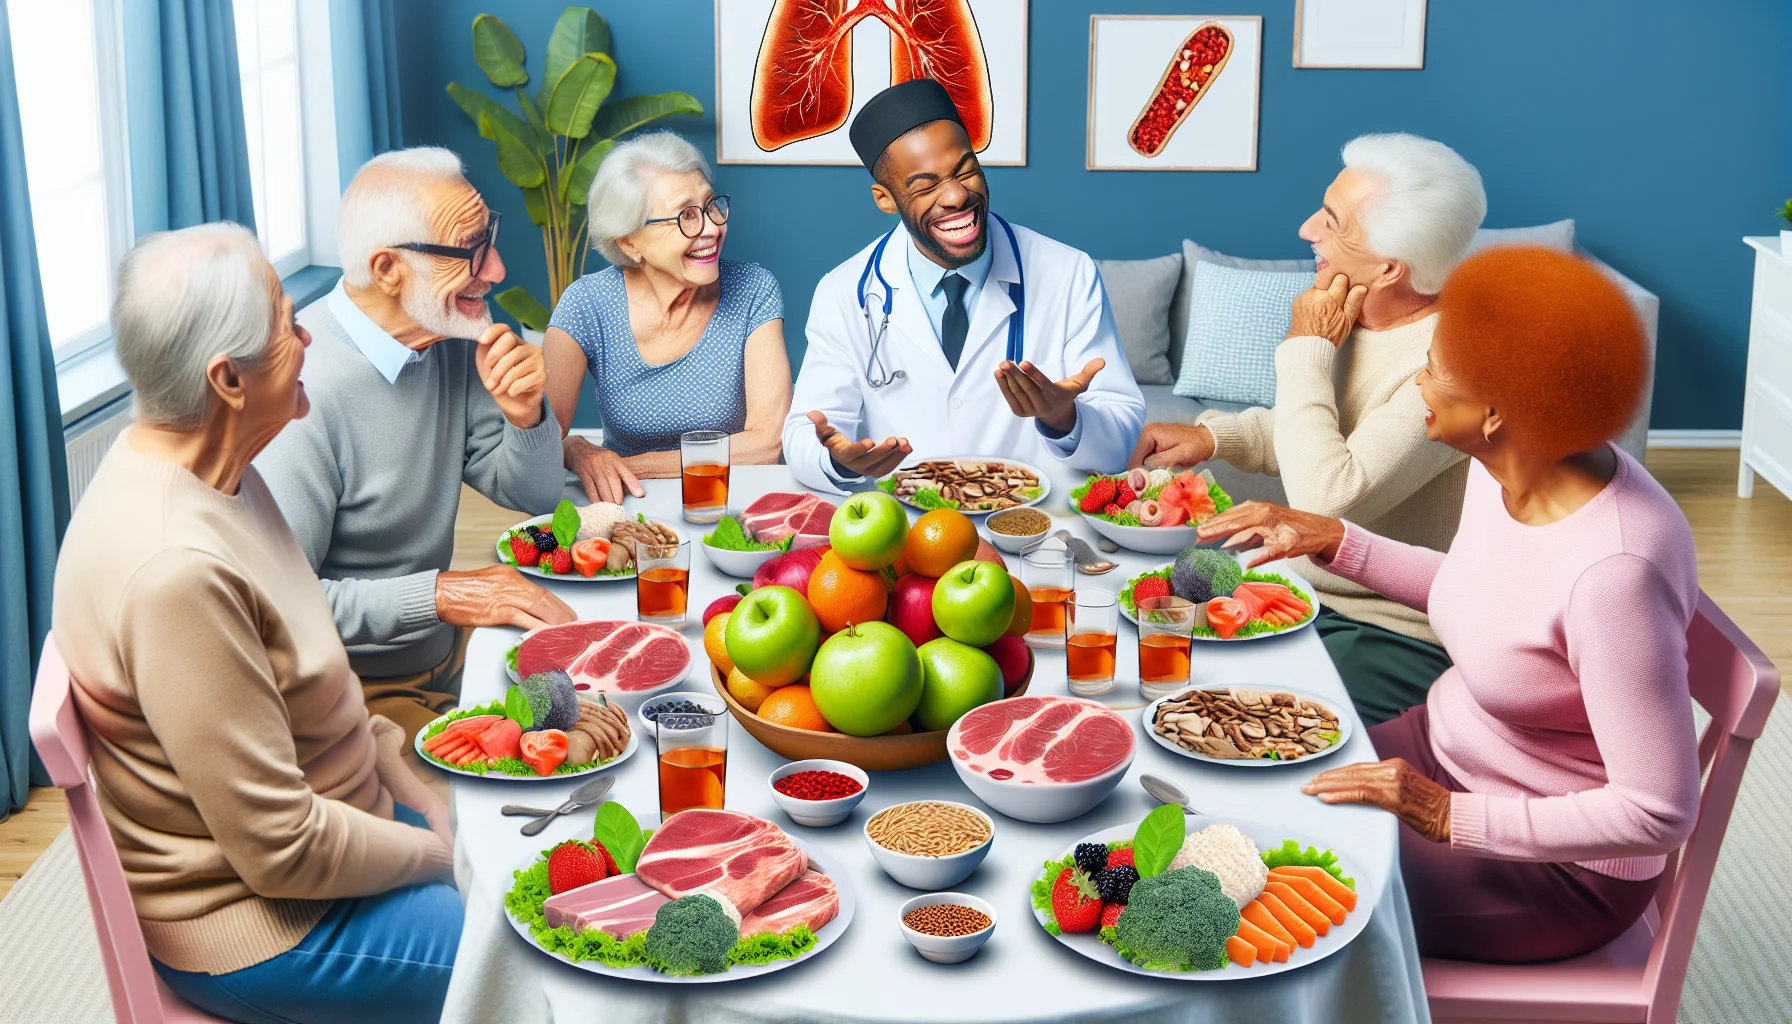 Generate a humorous image showcasing an anti-inflammatory meal plan. Illustrate an amusing scene at a lively and energetic senior citizen's get-together where they are discussing and sharing experiences about their healthy diets. Display various plates filled with colorful fruits, lean meats, whole grains, and greens symbolizing anti-inflammatory foods. Show the diverse group of older individuals - African descended woman, White male, Hispanic woman, and Middle-Eastern man - all engaged in lighthearted conversations and interactions around the topic of their diet plans.